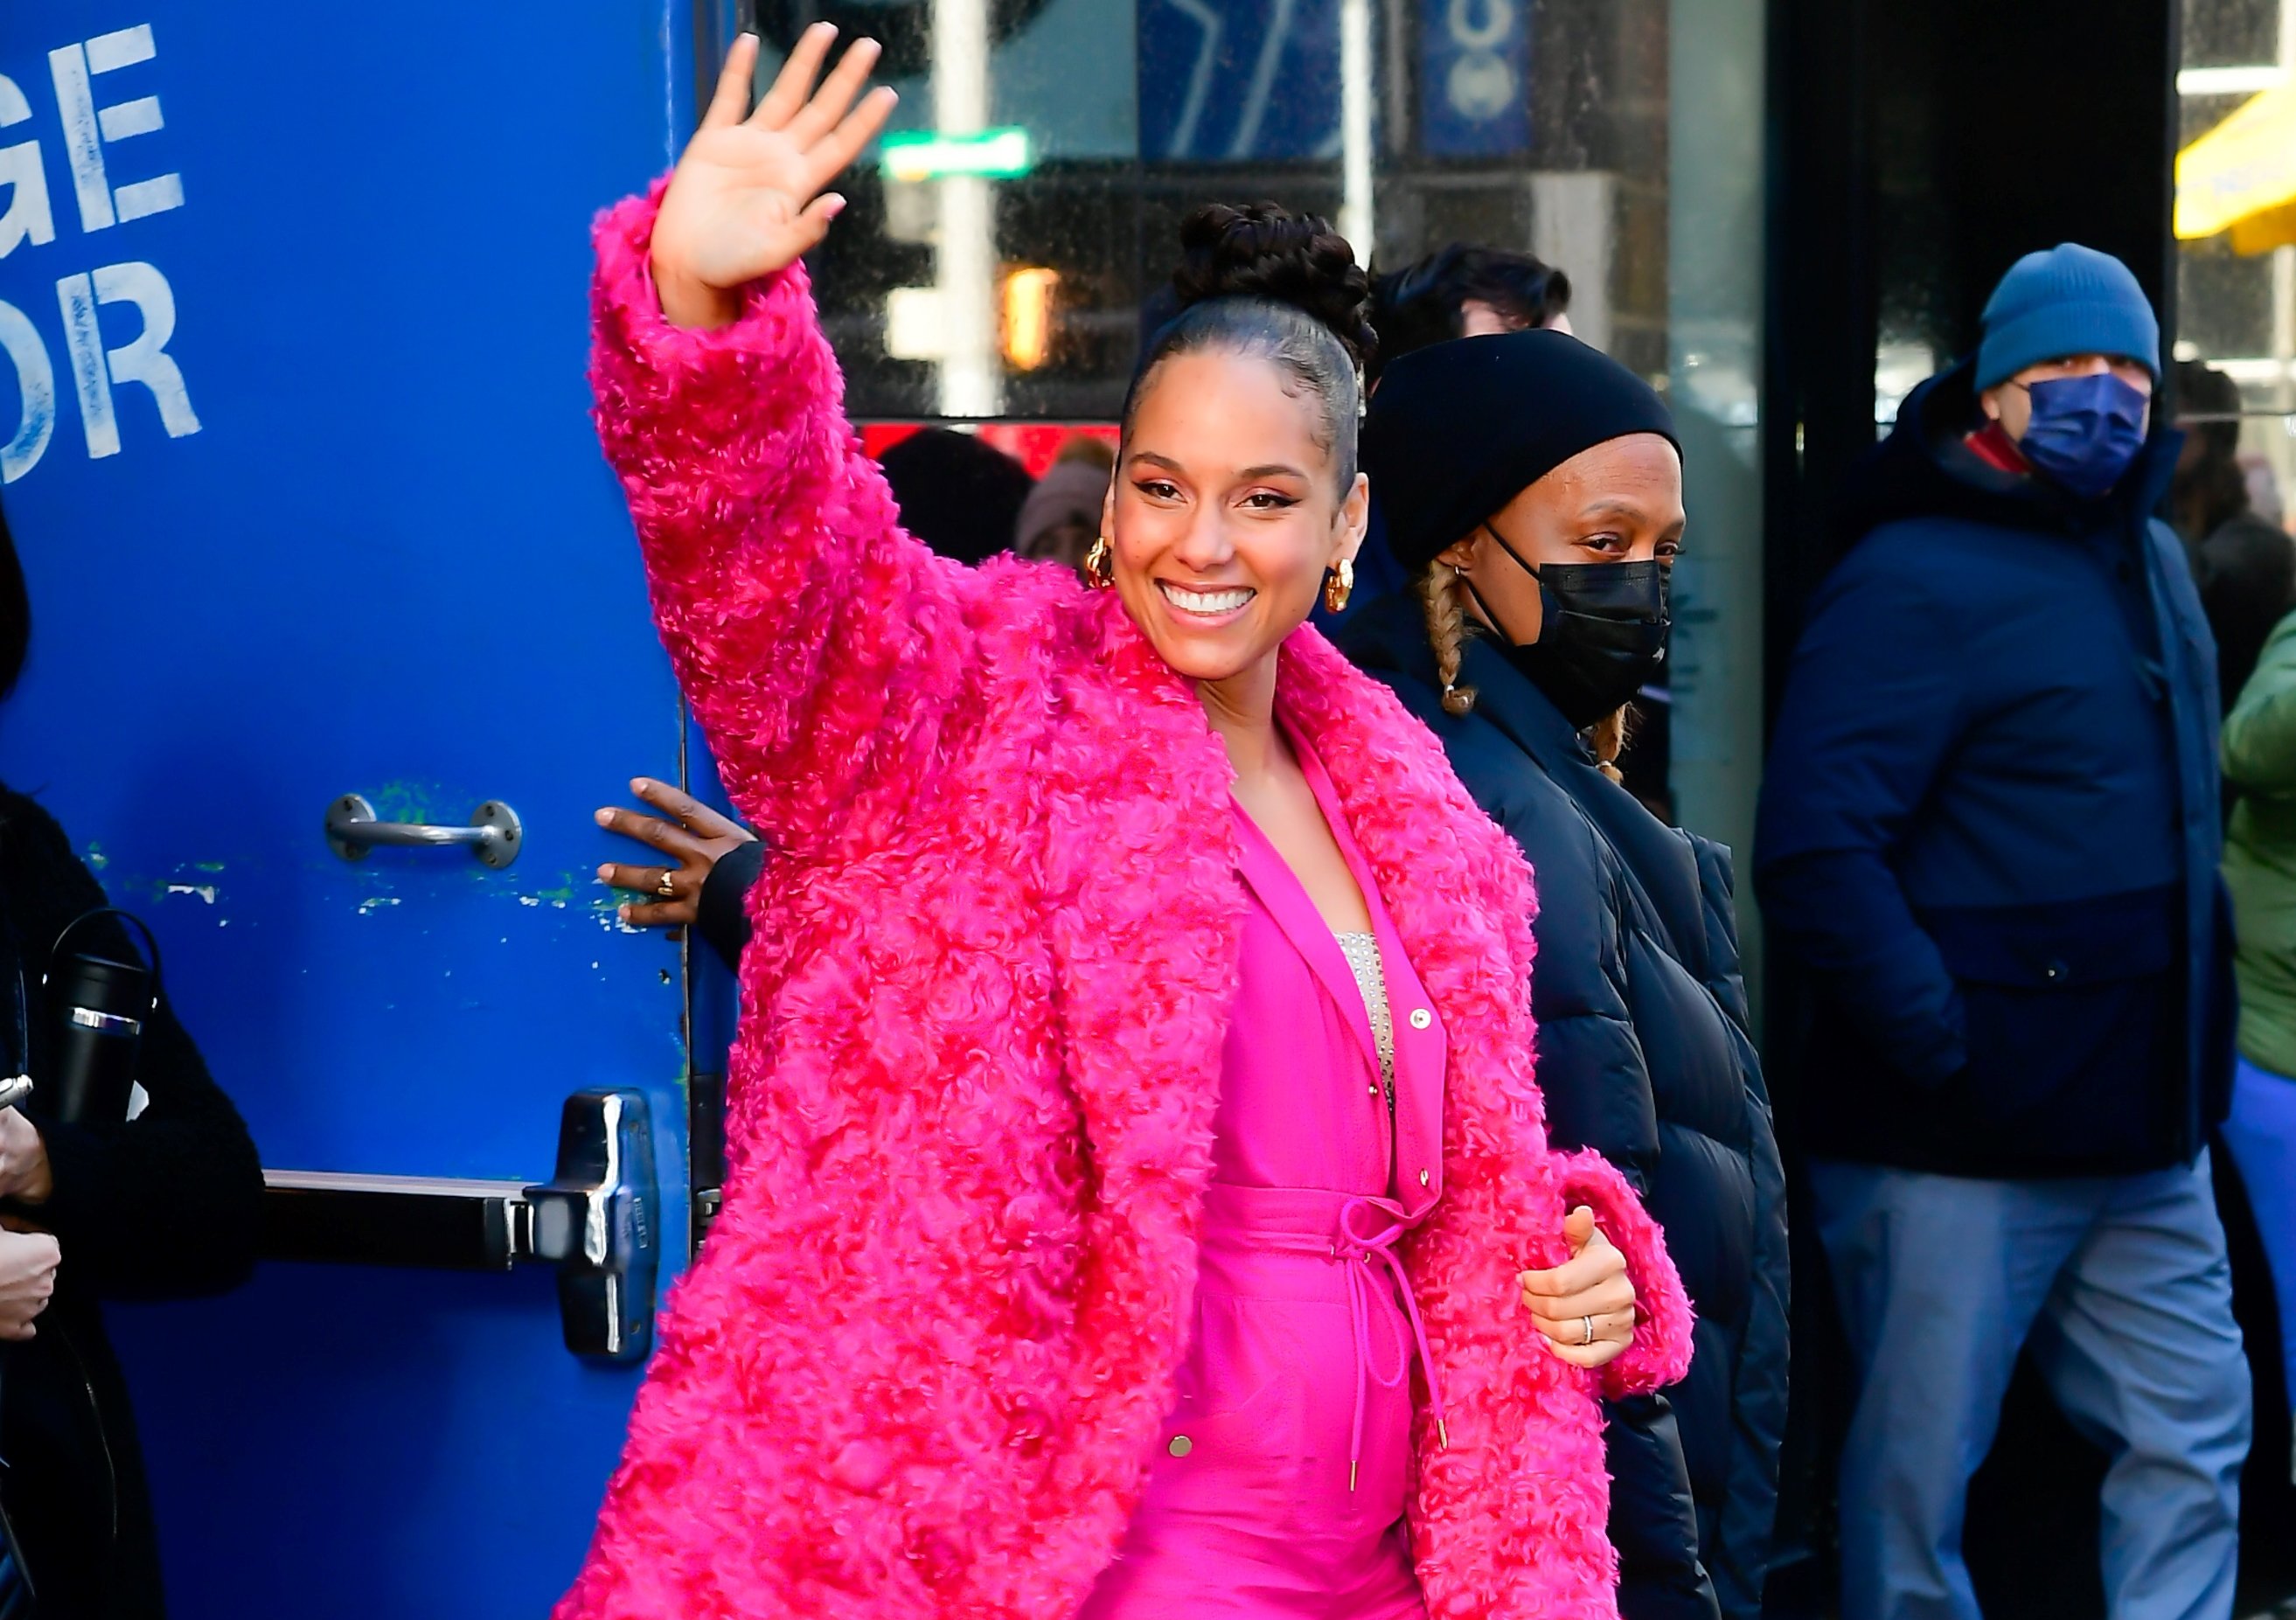 Alicia Keys waves to fans outside 'Good Morning America' studio in NYC